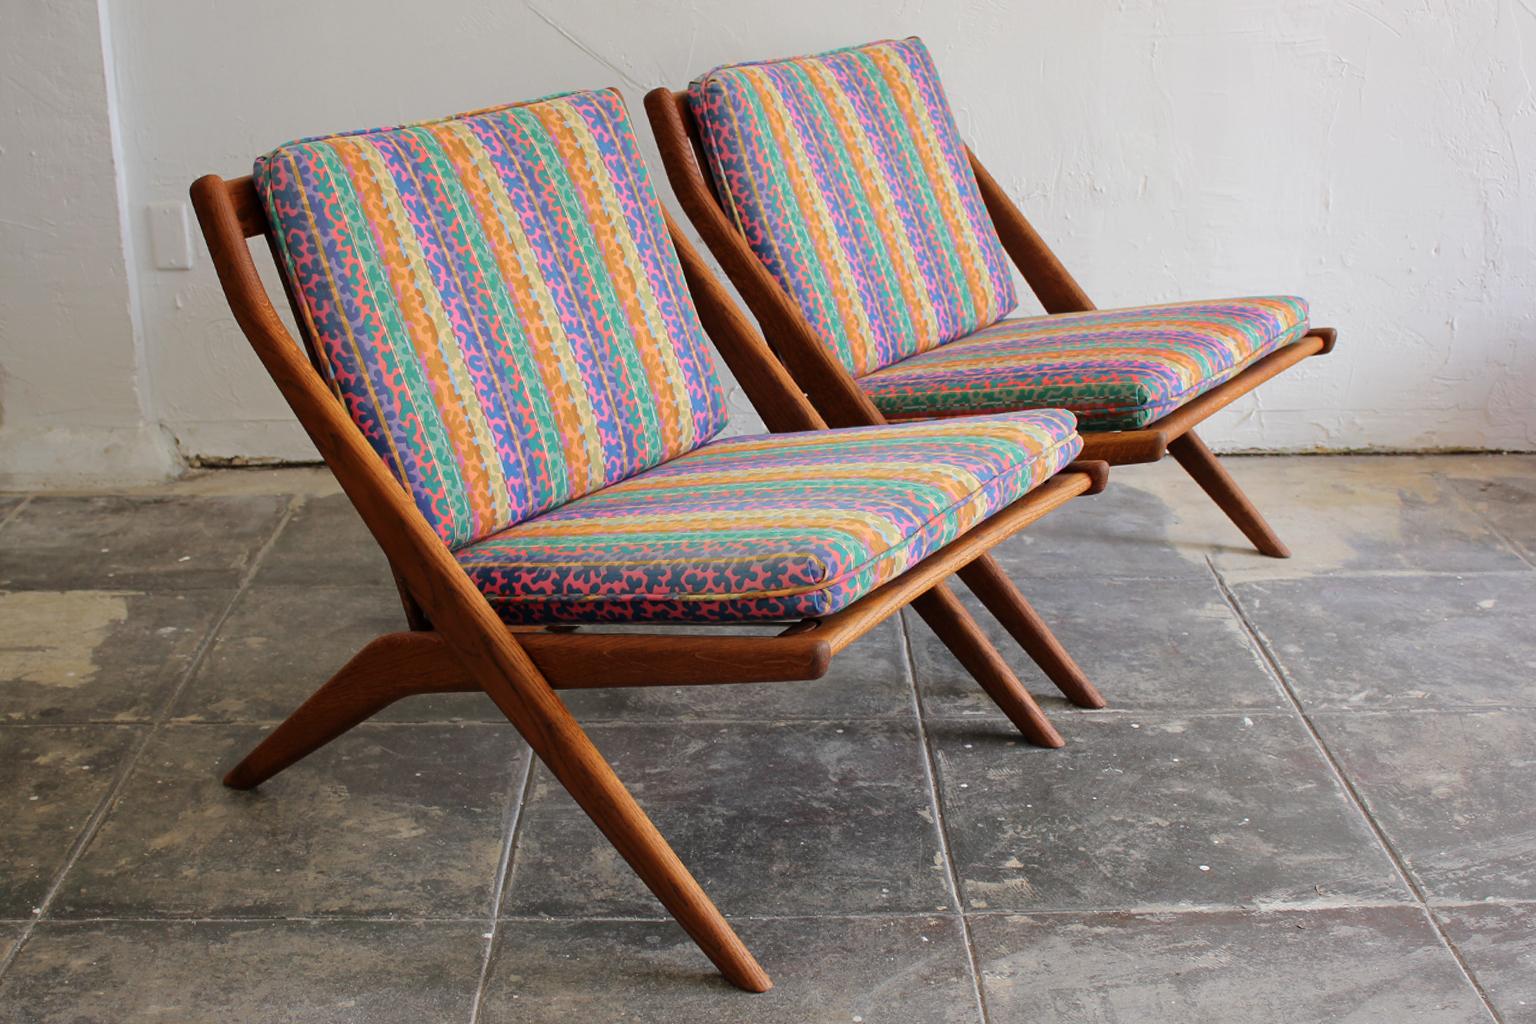 Beautiful pair of original DUX scissor lounge chairs designed by Swedish designer Folke Ohlsson, circa 1960s. The chairs have their original upholstery. Great colorful mod design. Reminds me of Jack Lenor Larsen or Missoni fabric. Some light fading